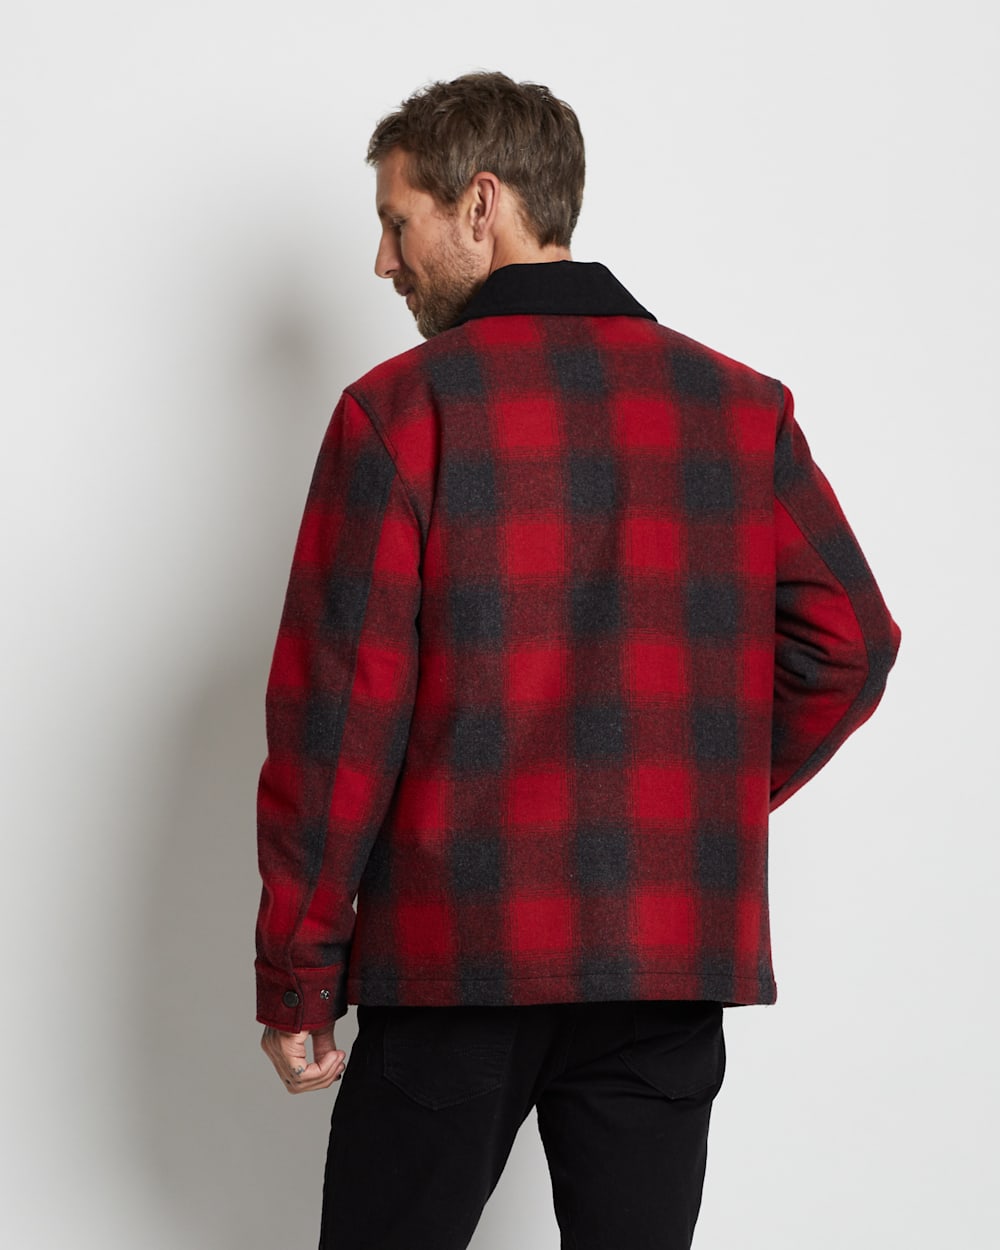 ALTERNATE VIEW OF MEN'S FRONT RANGE JACKET IN RED OMBRE image number 4